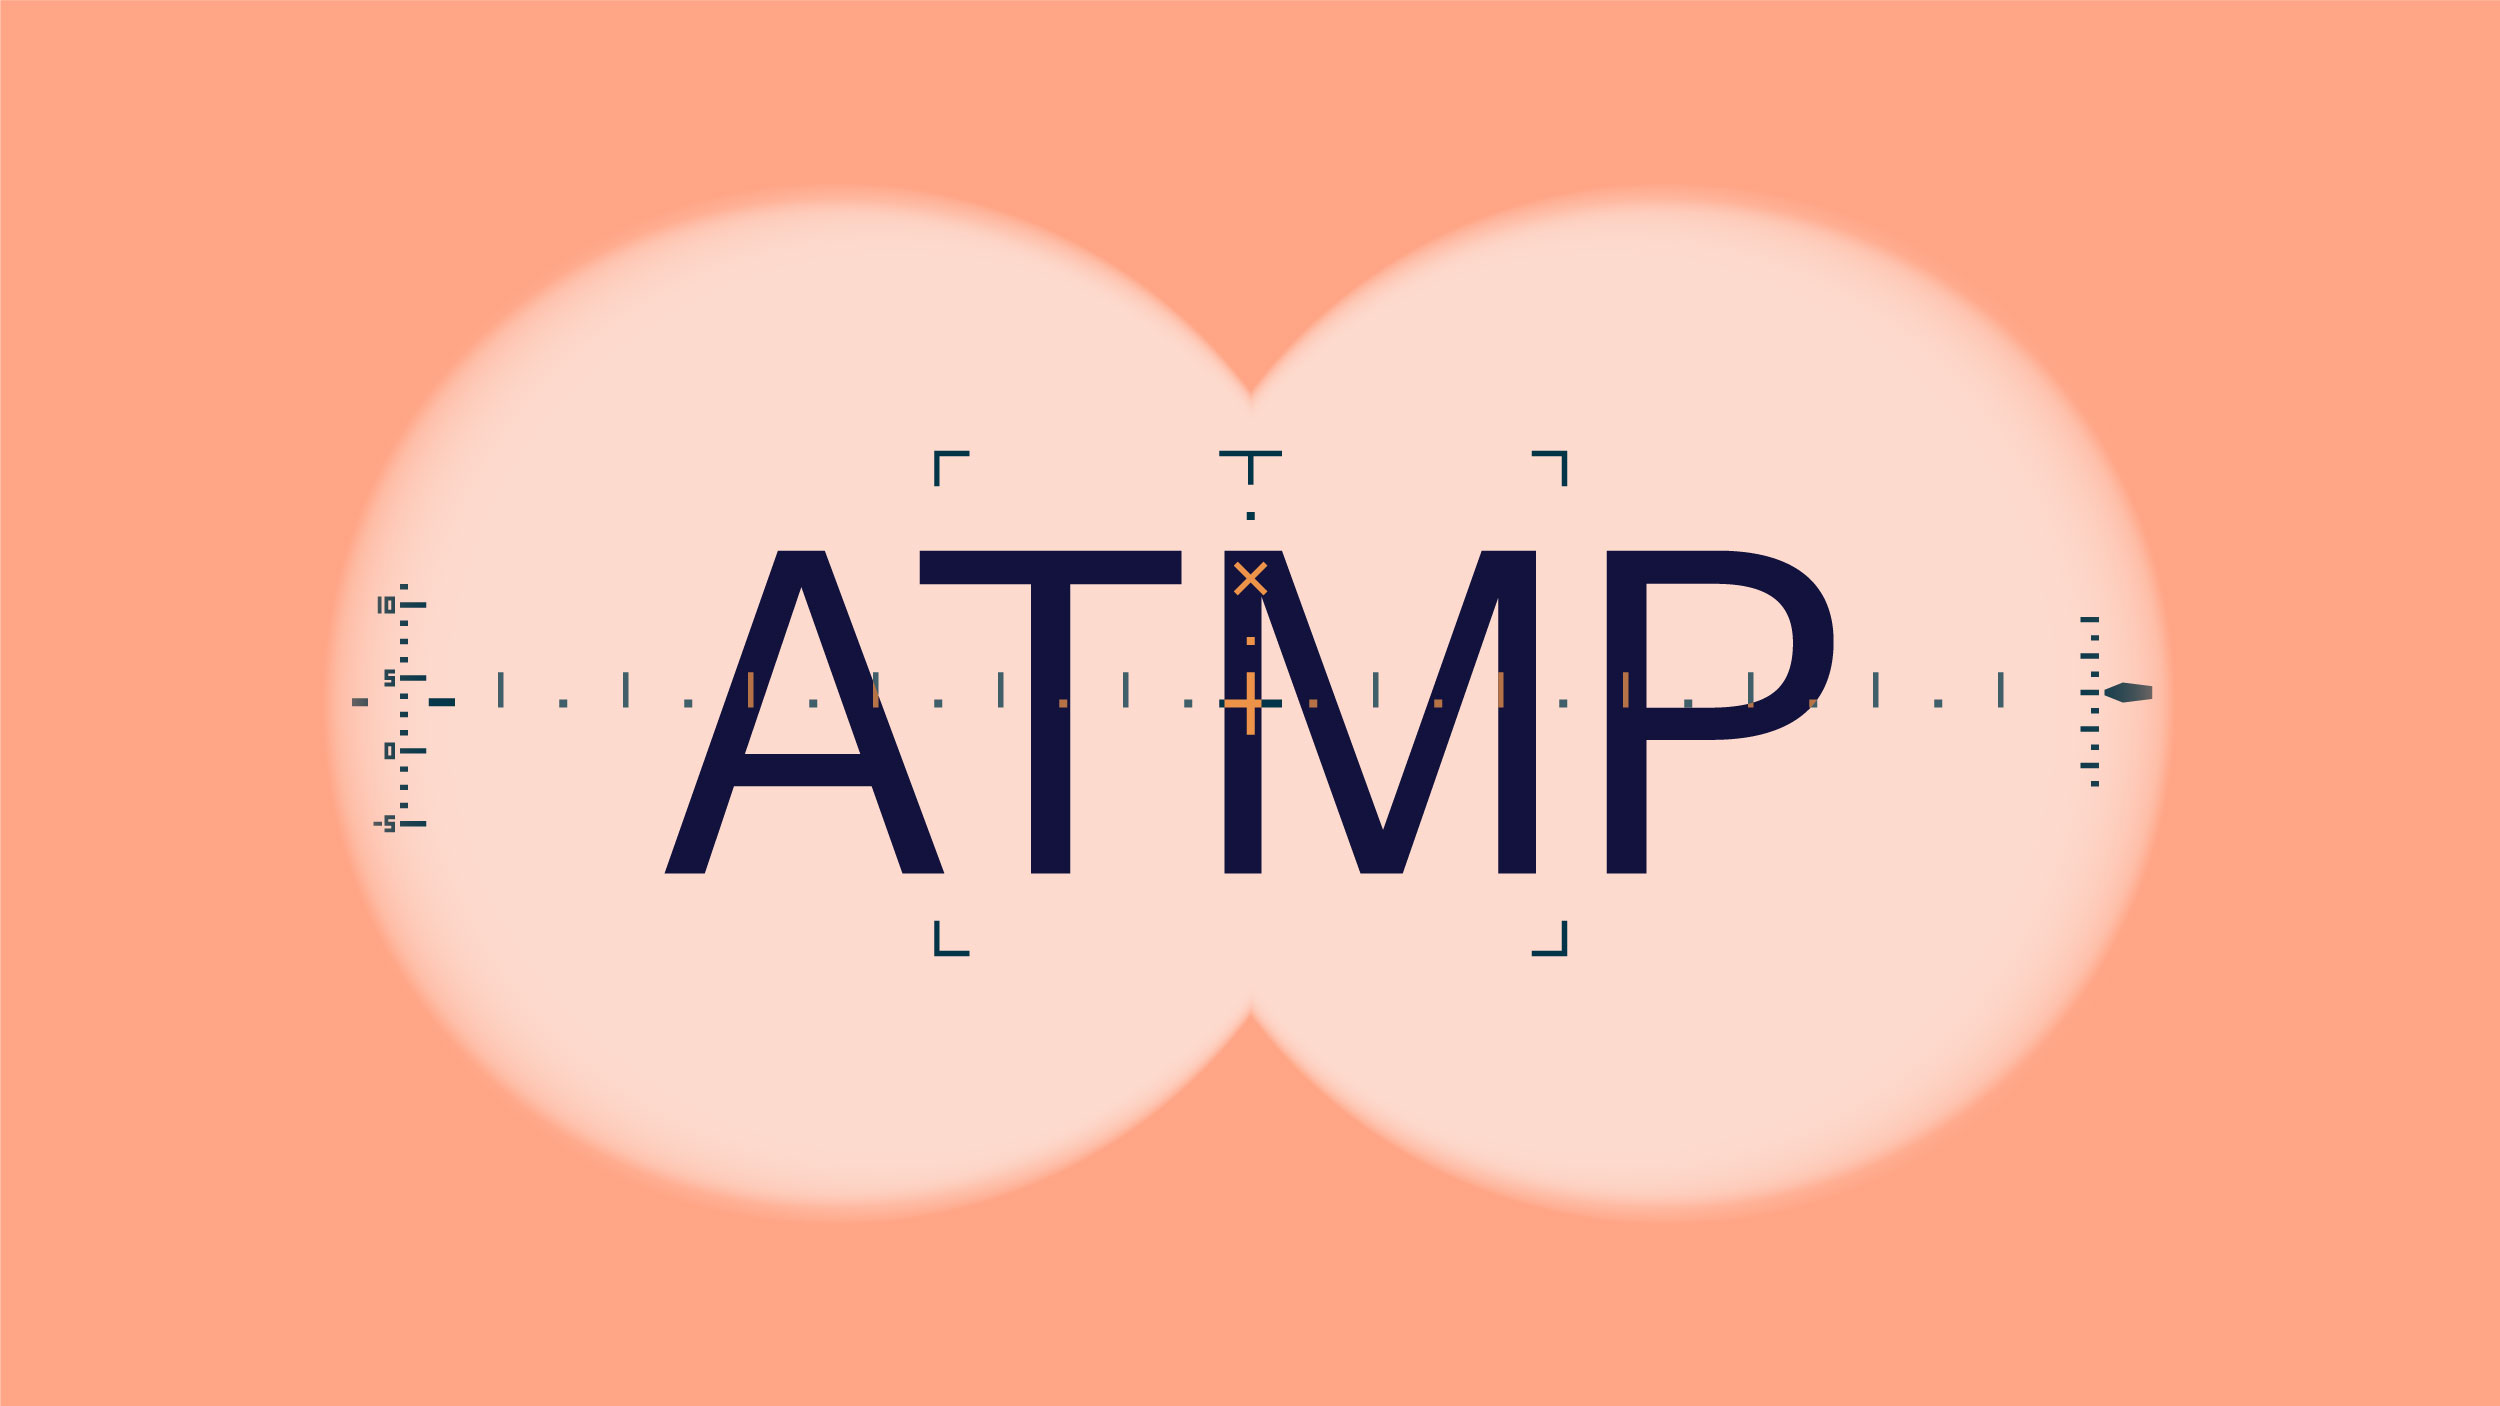 What does the regulatory landscape for ATMPs look like?